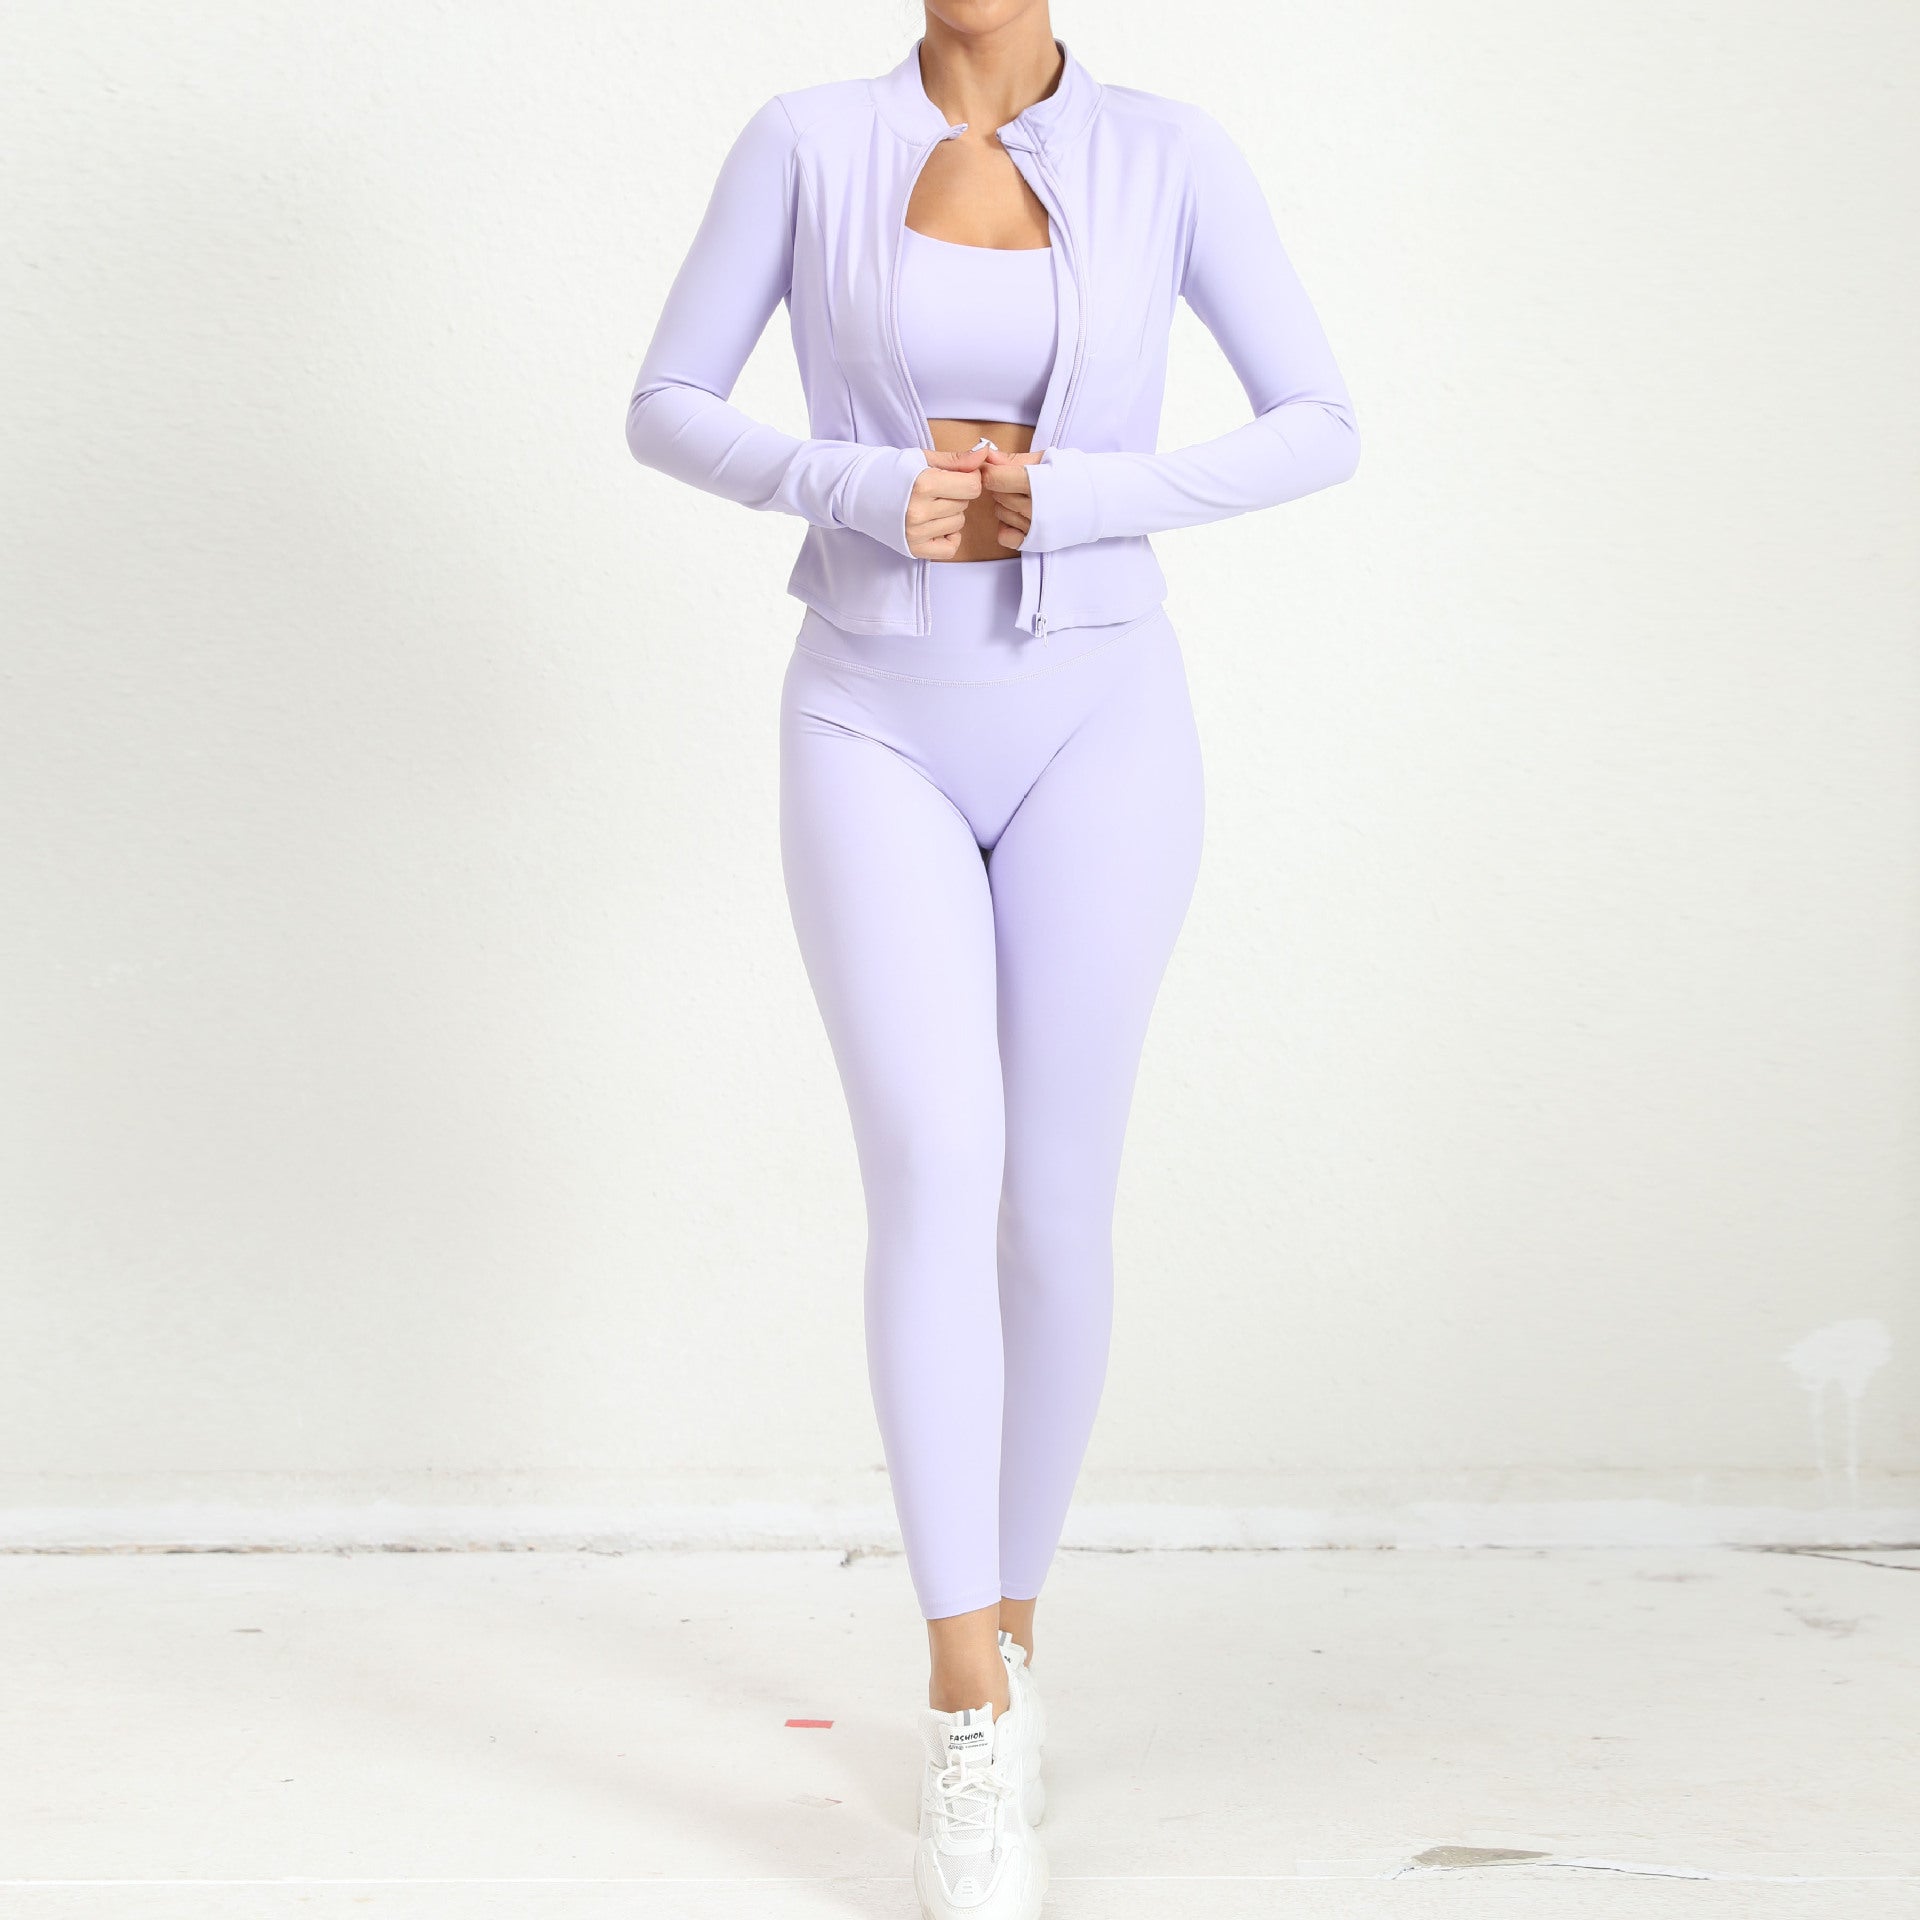 Winter Outdoors Sports Skinny Yoga Clothes Suit Nude Feel Fitness Clothes Shockproof High Waist Yoga Clothes Three Piece Suit